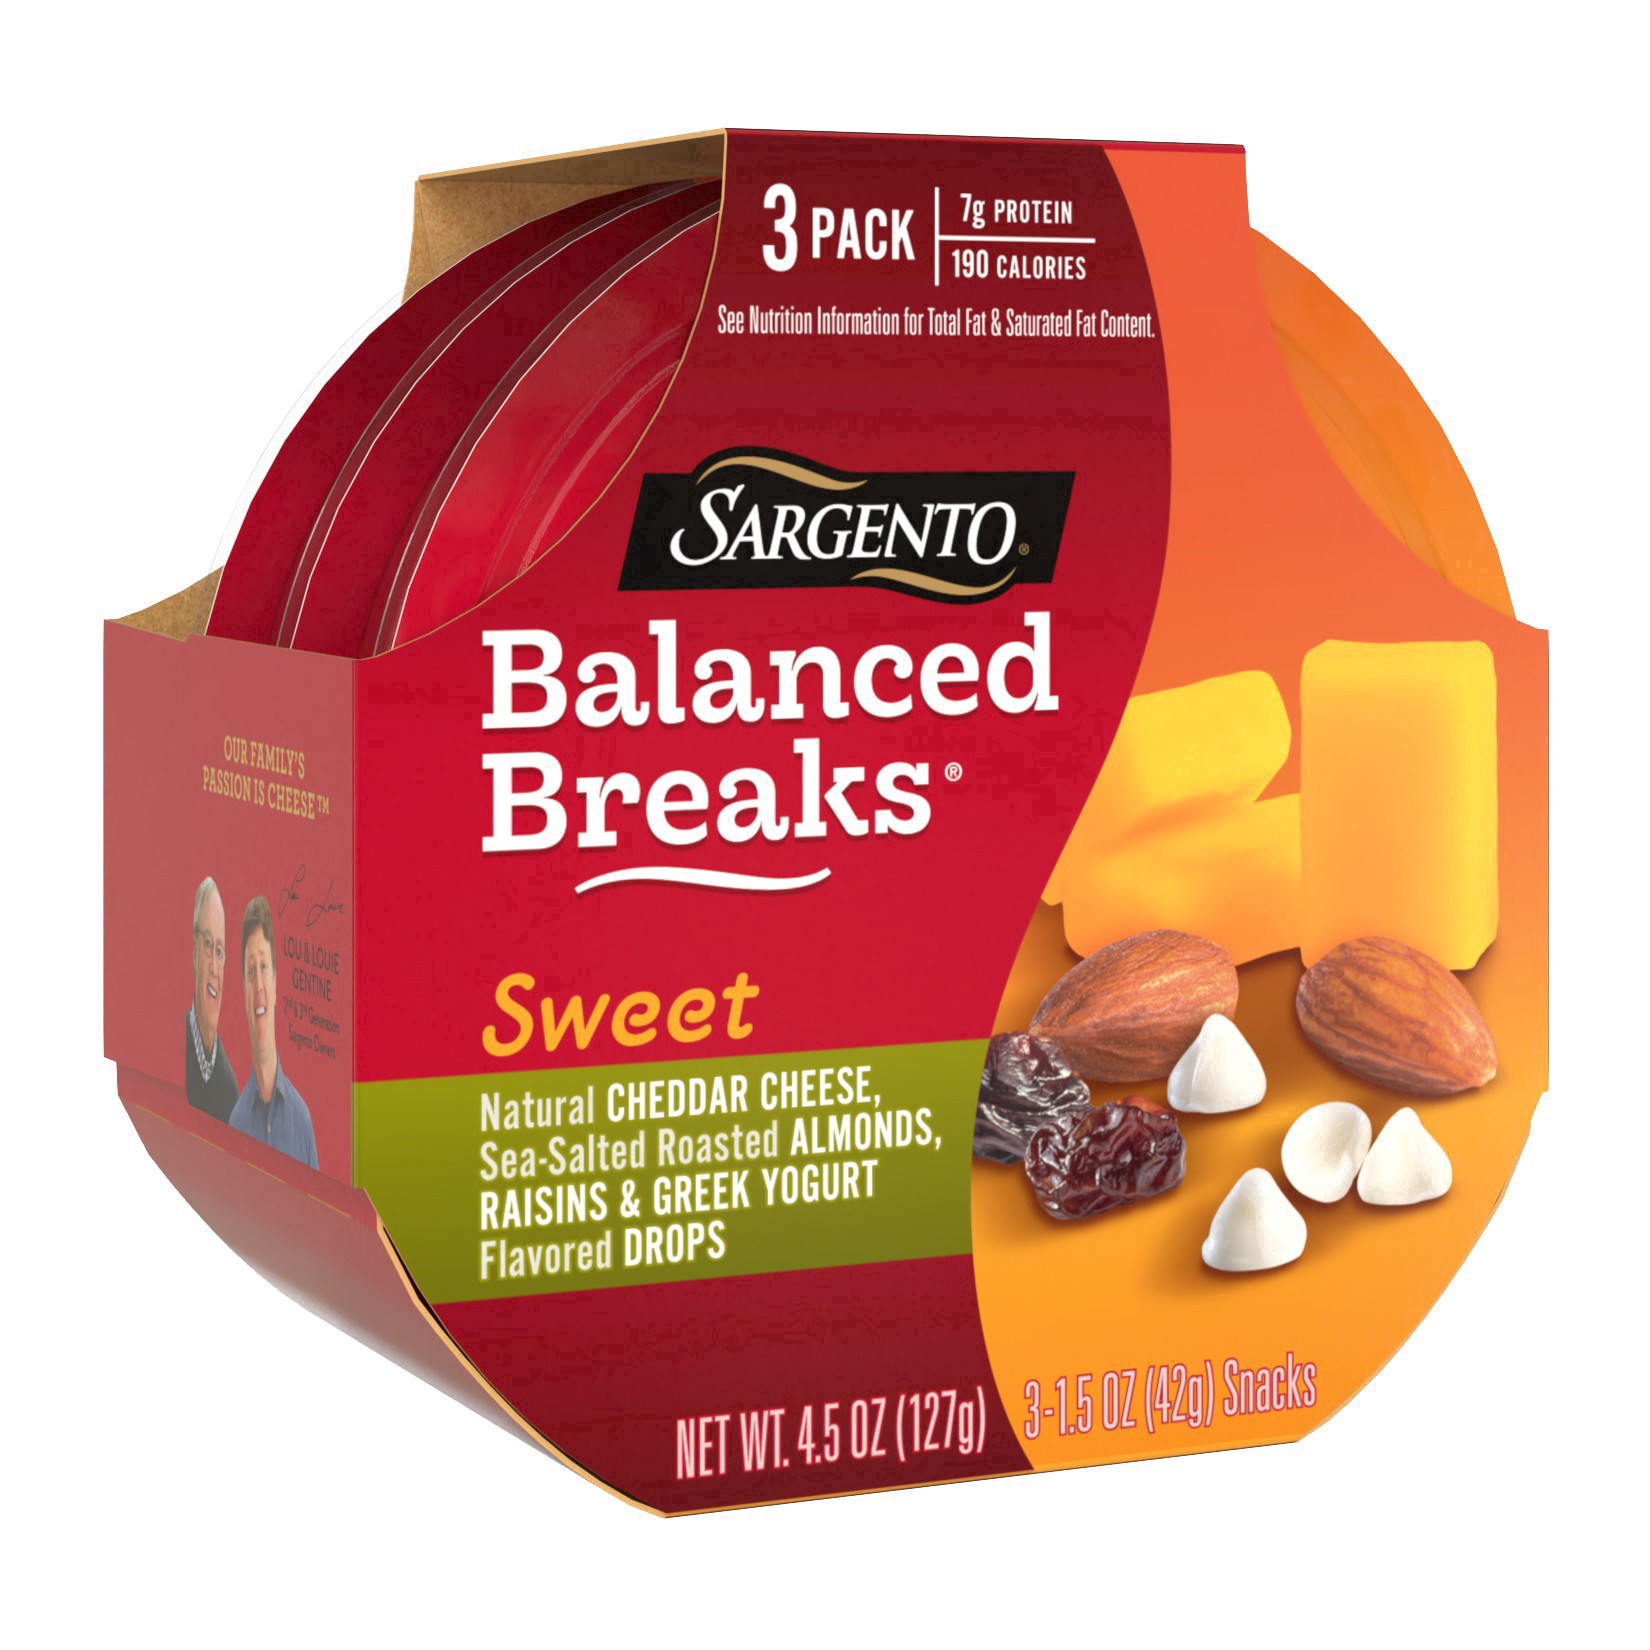 slide 24 of 30, Sargento Sweet Balanced Breaks with Natural Cheddar Cheese, Sea-Salted Roasted Almonds, Raisins and Greek Yogurt Flavored Drops, 1.5 oz., 3-Pack, 3 ct